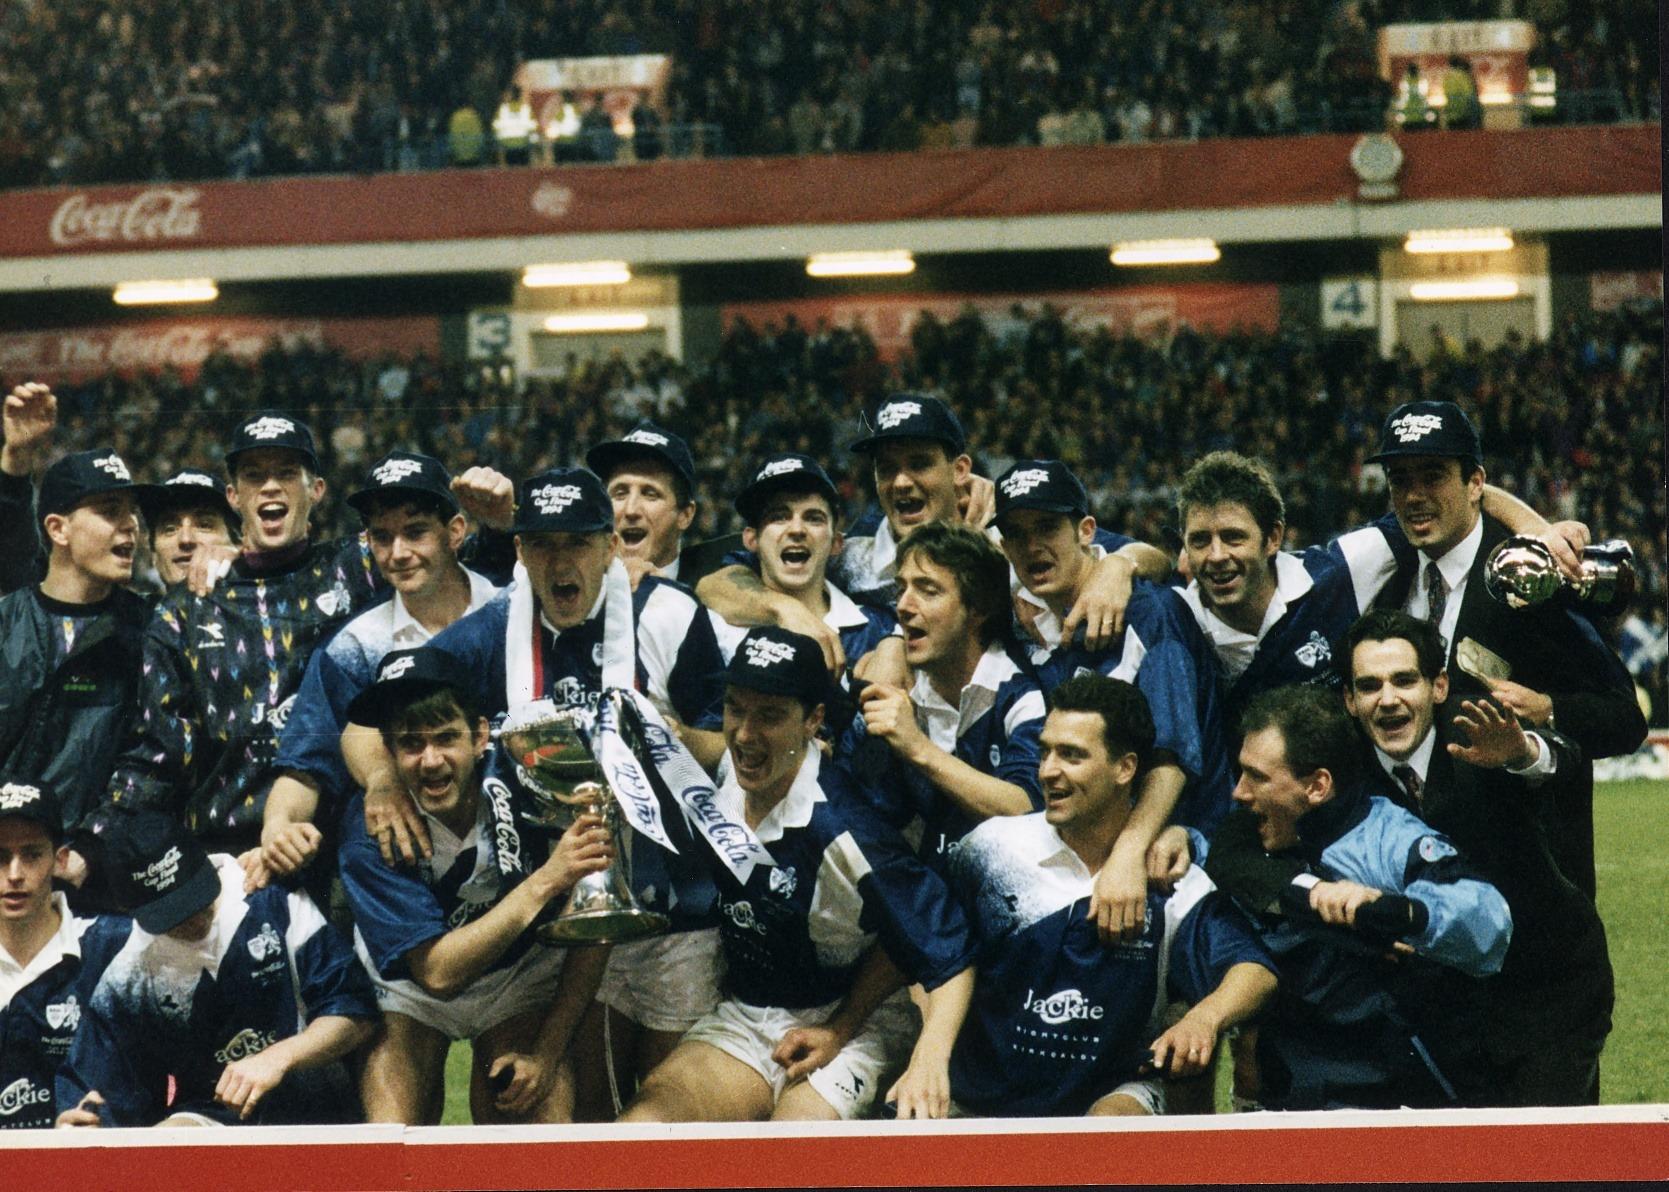 The Raith Rovers team celebrating winning the Coca-Cola Cup in 1994 when they beat Celtic in the final.